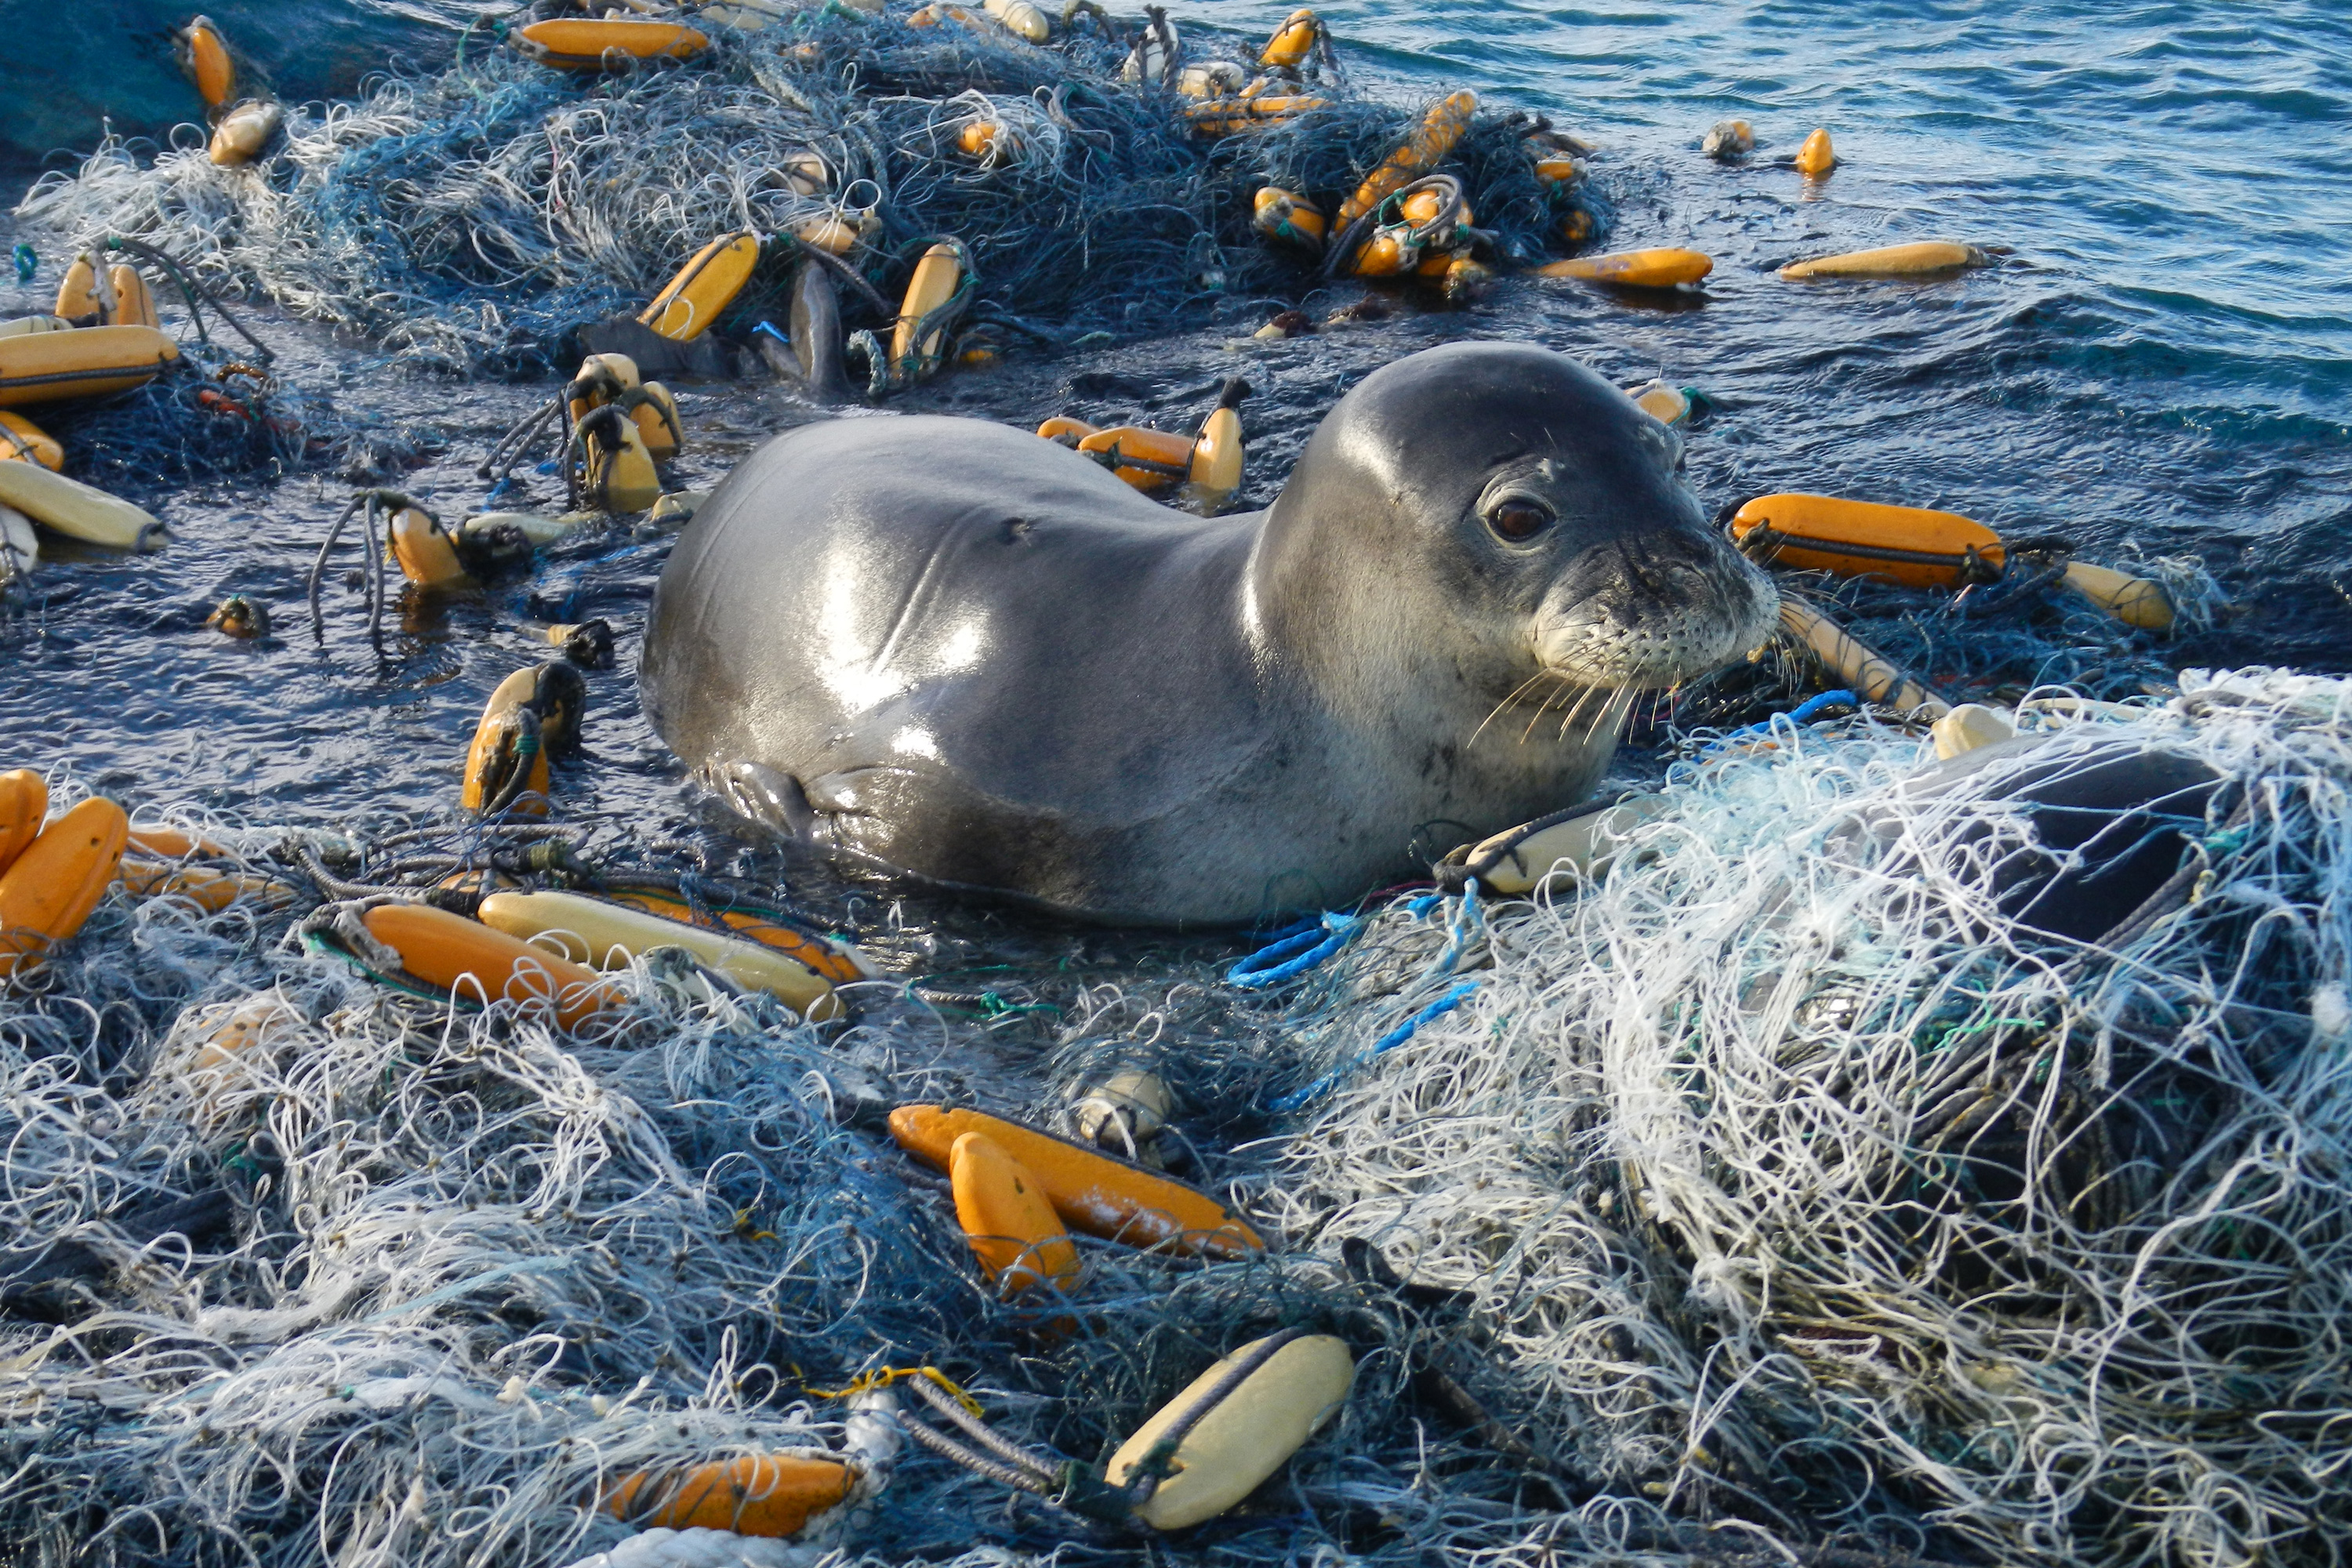 Juvenile monk seal resting on a ball of fishing nets